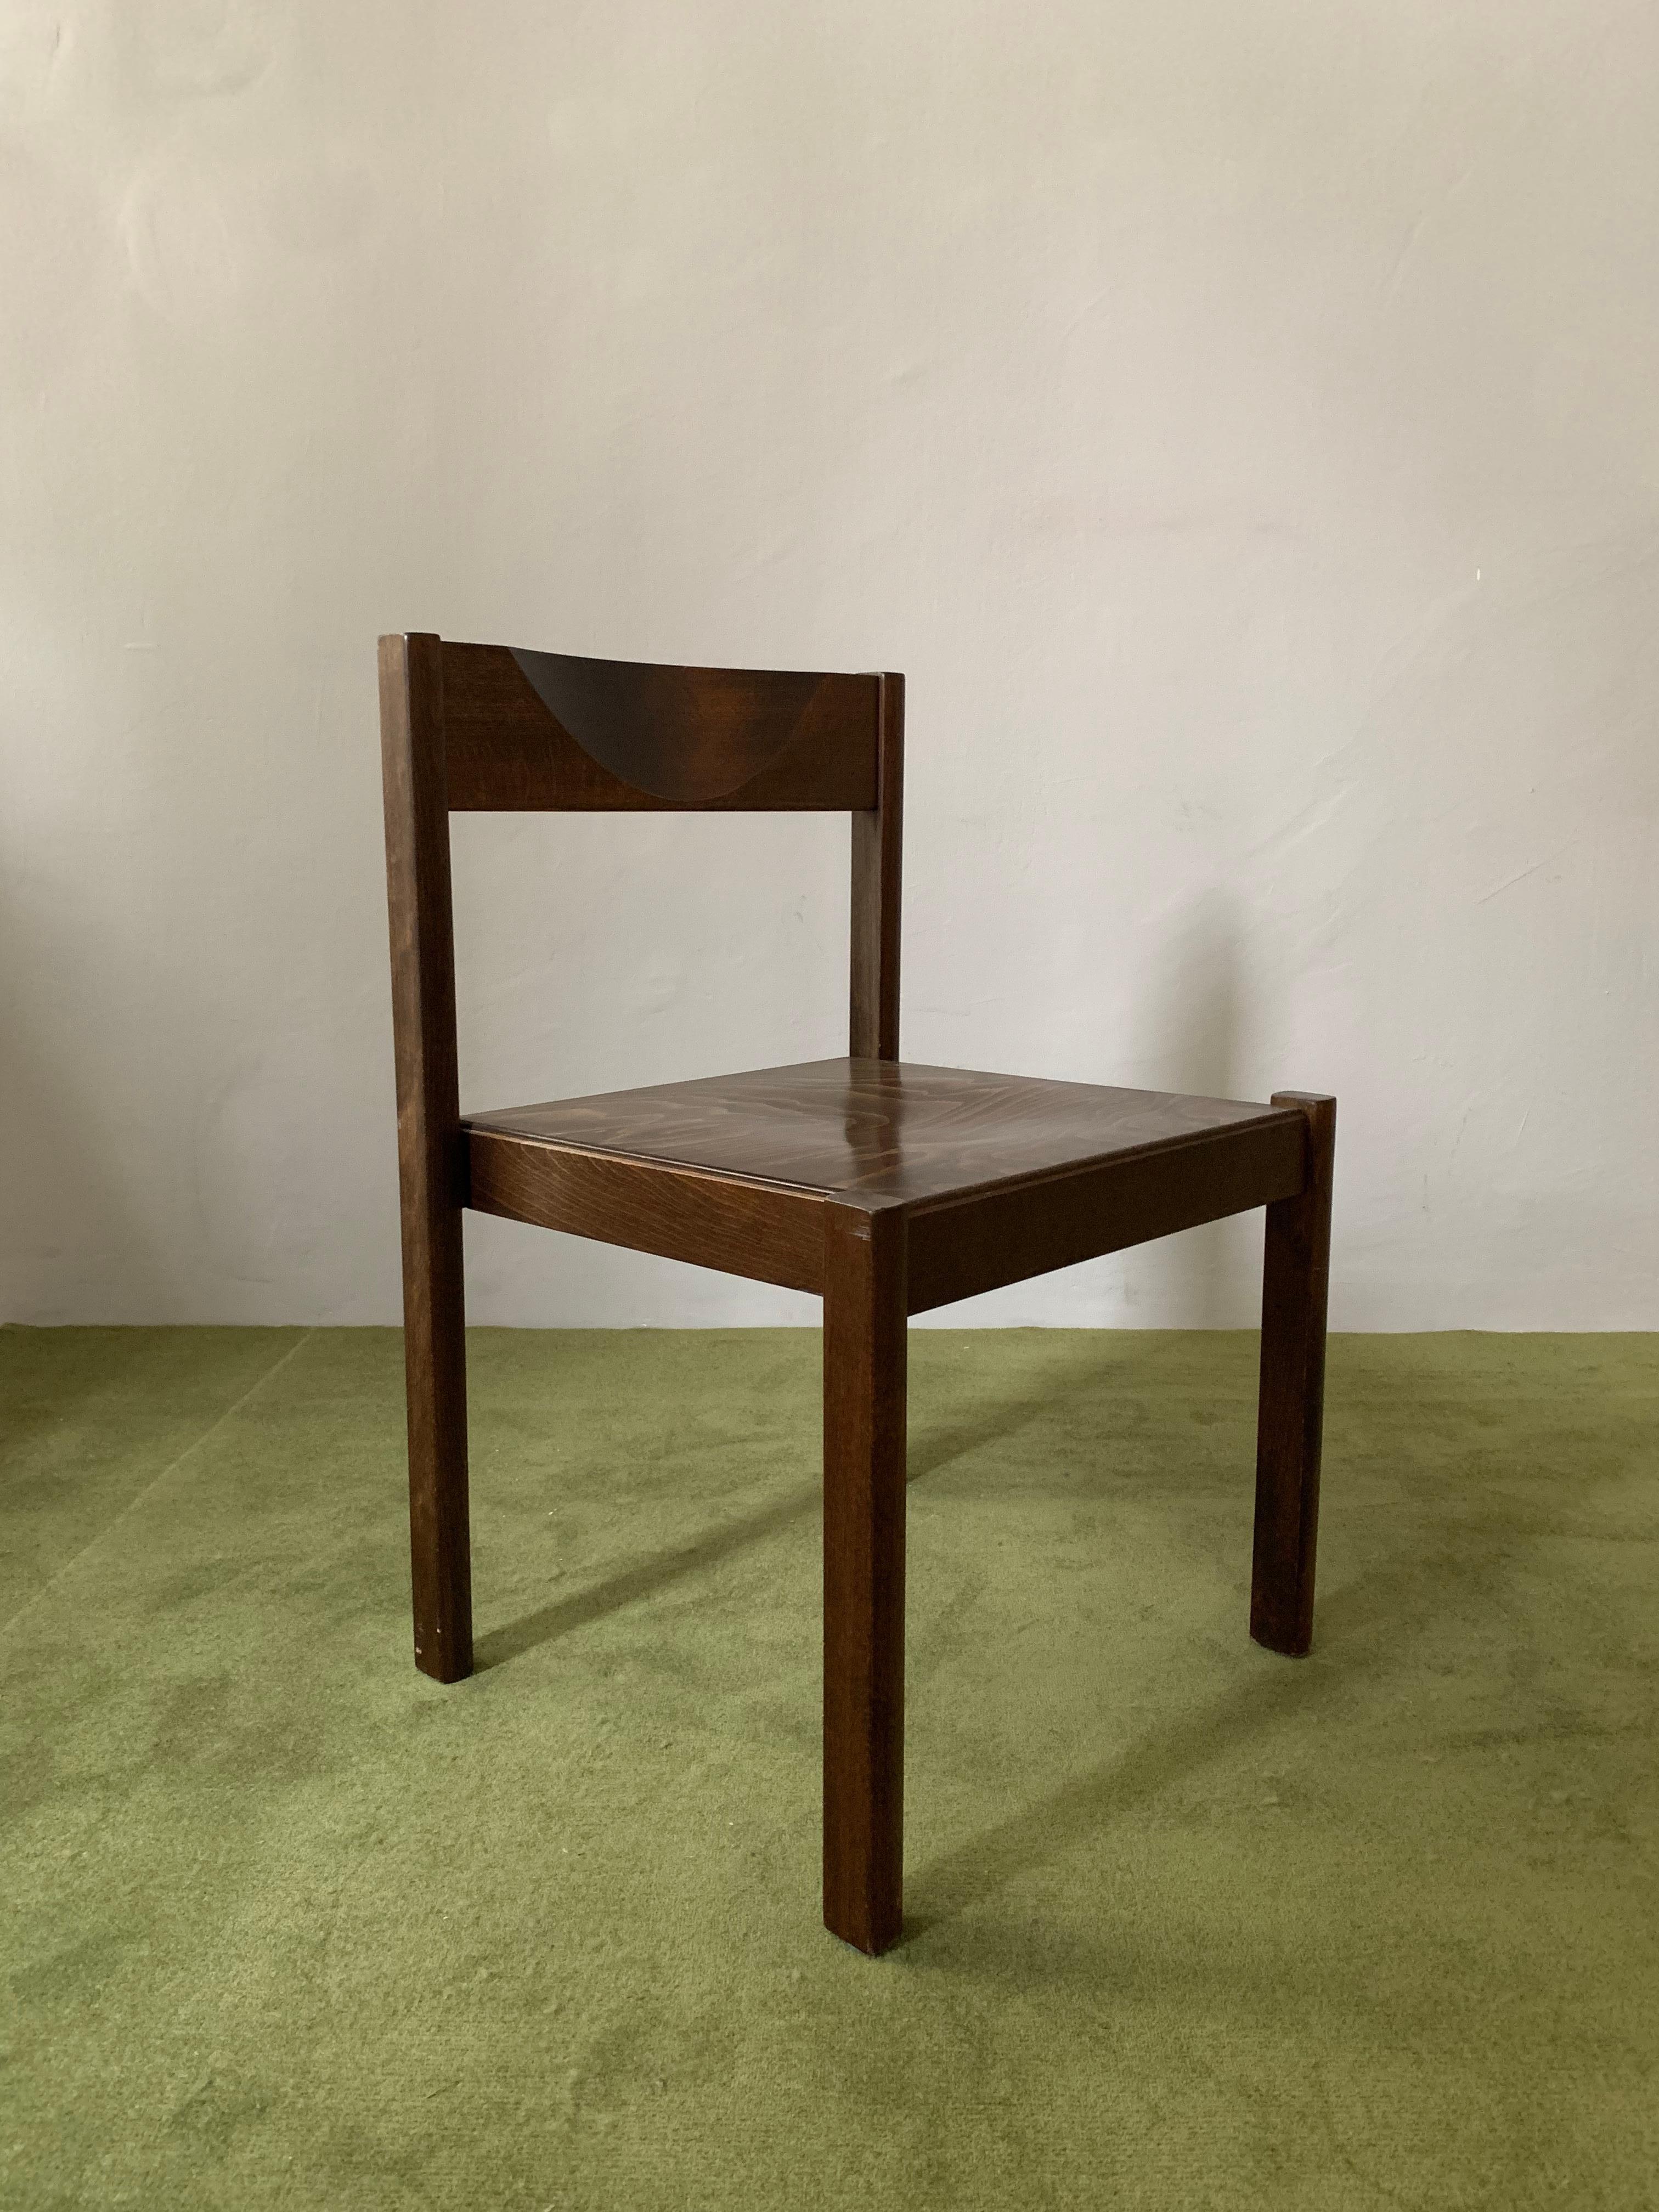 The rare and iconic Santo Chairs from Edlef Bandixen are dated back to 1969 and being characterized by modernity and minimalism. 
4 pieces of Edlef Bandixen's Santo chairs are available. Each pieces are in very good condition. Sold as set  The wood